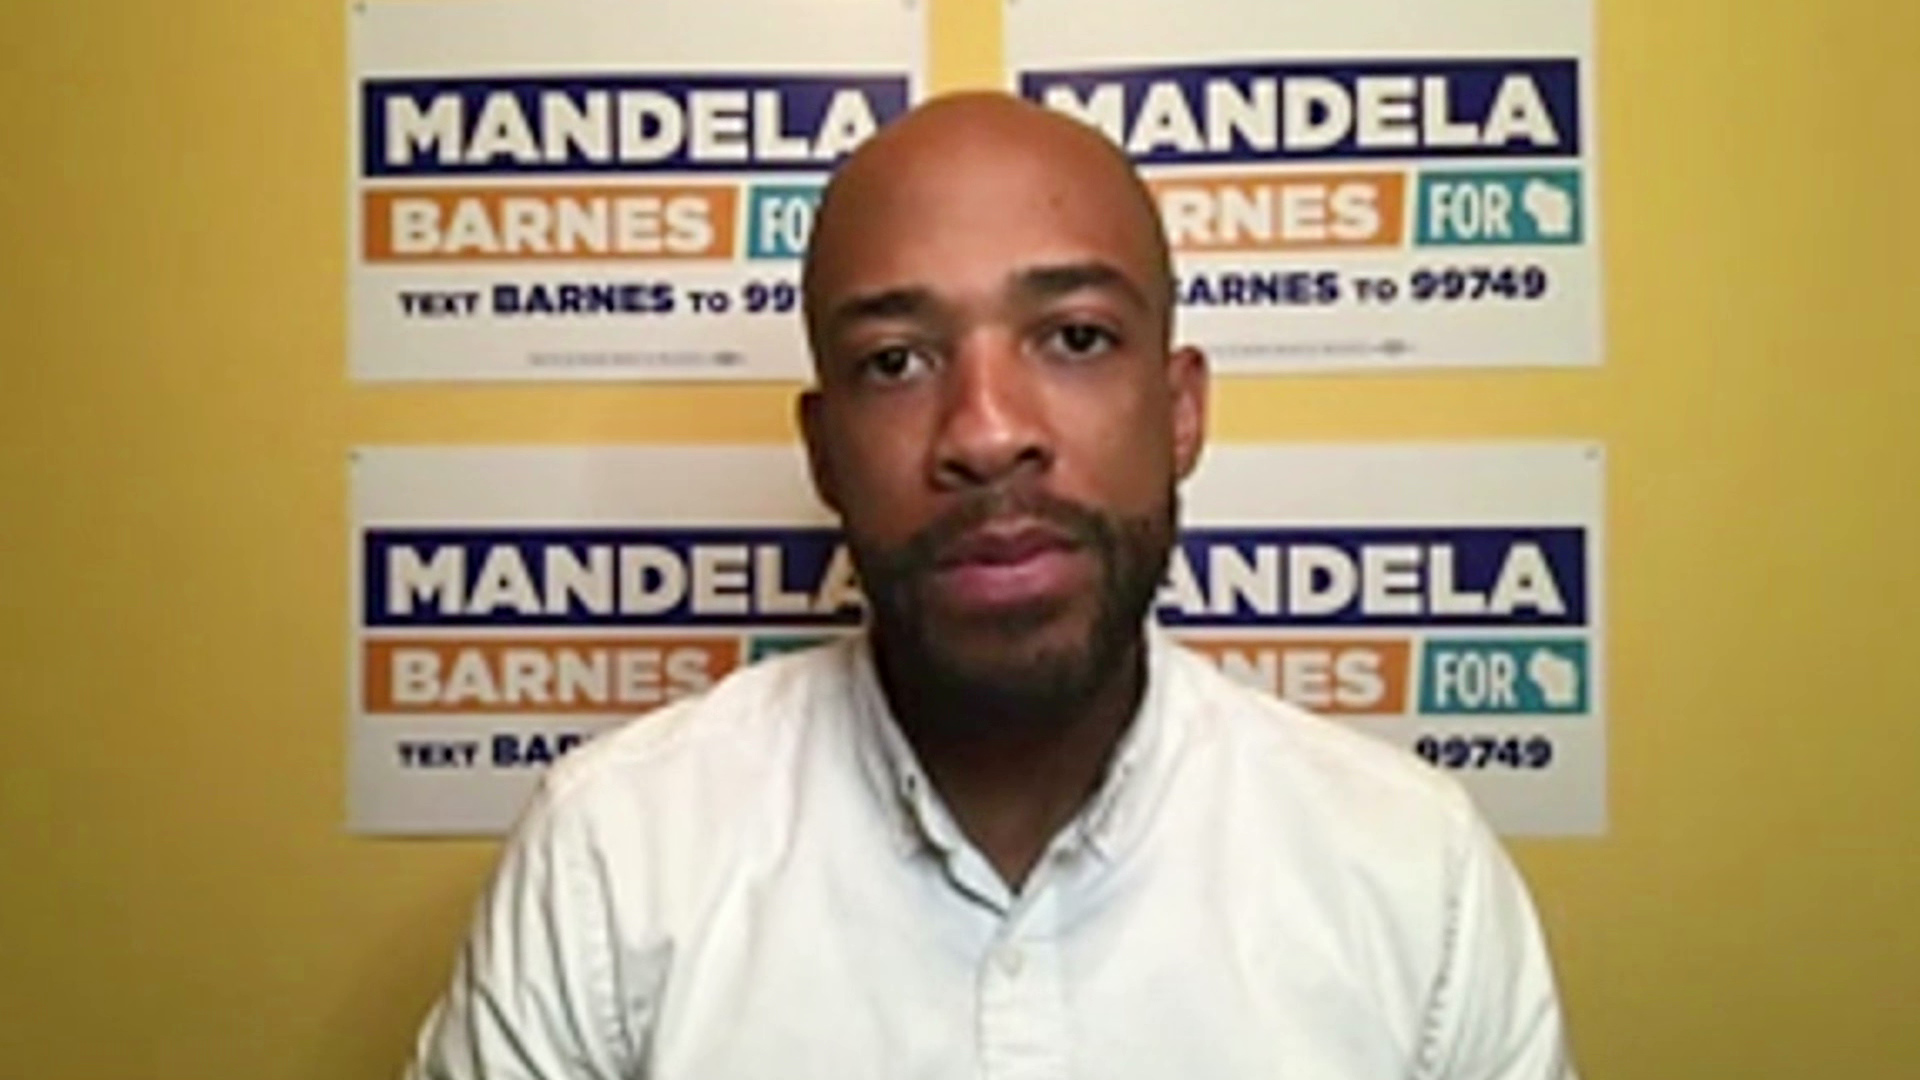 Mandela Barnes speaks while looking at a camera during an online interview with campaign posters in the background.